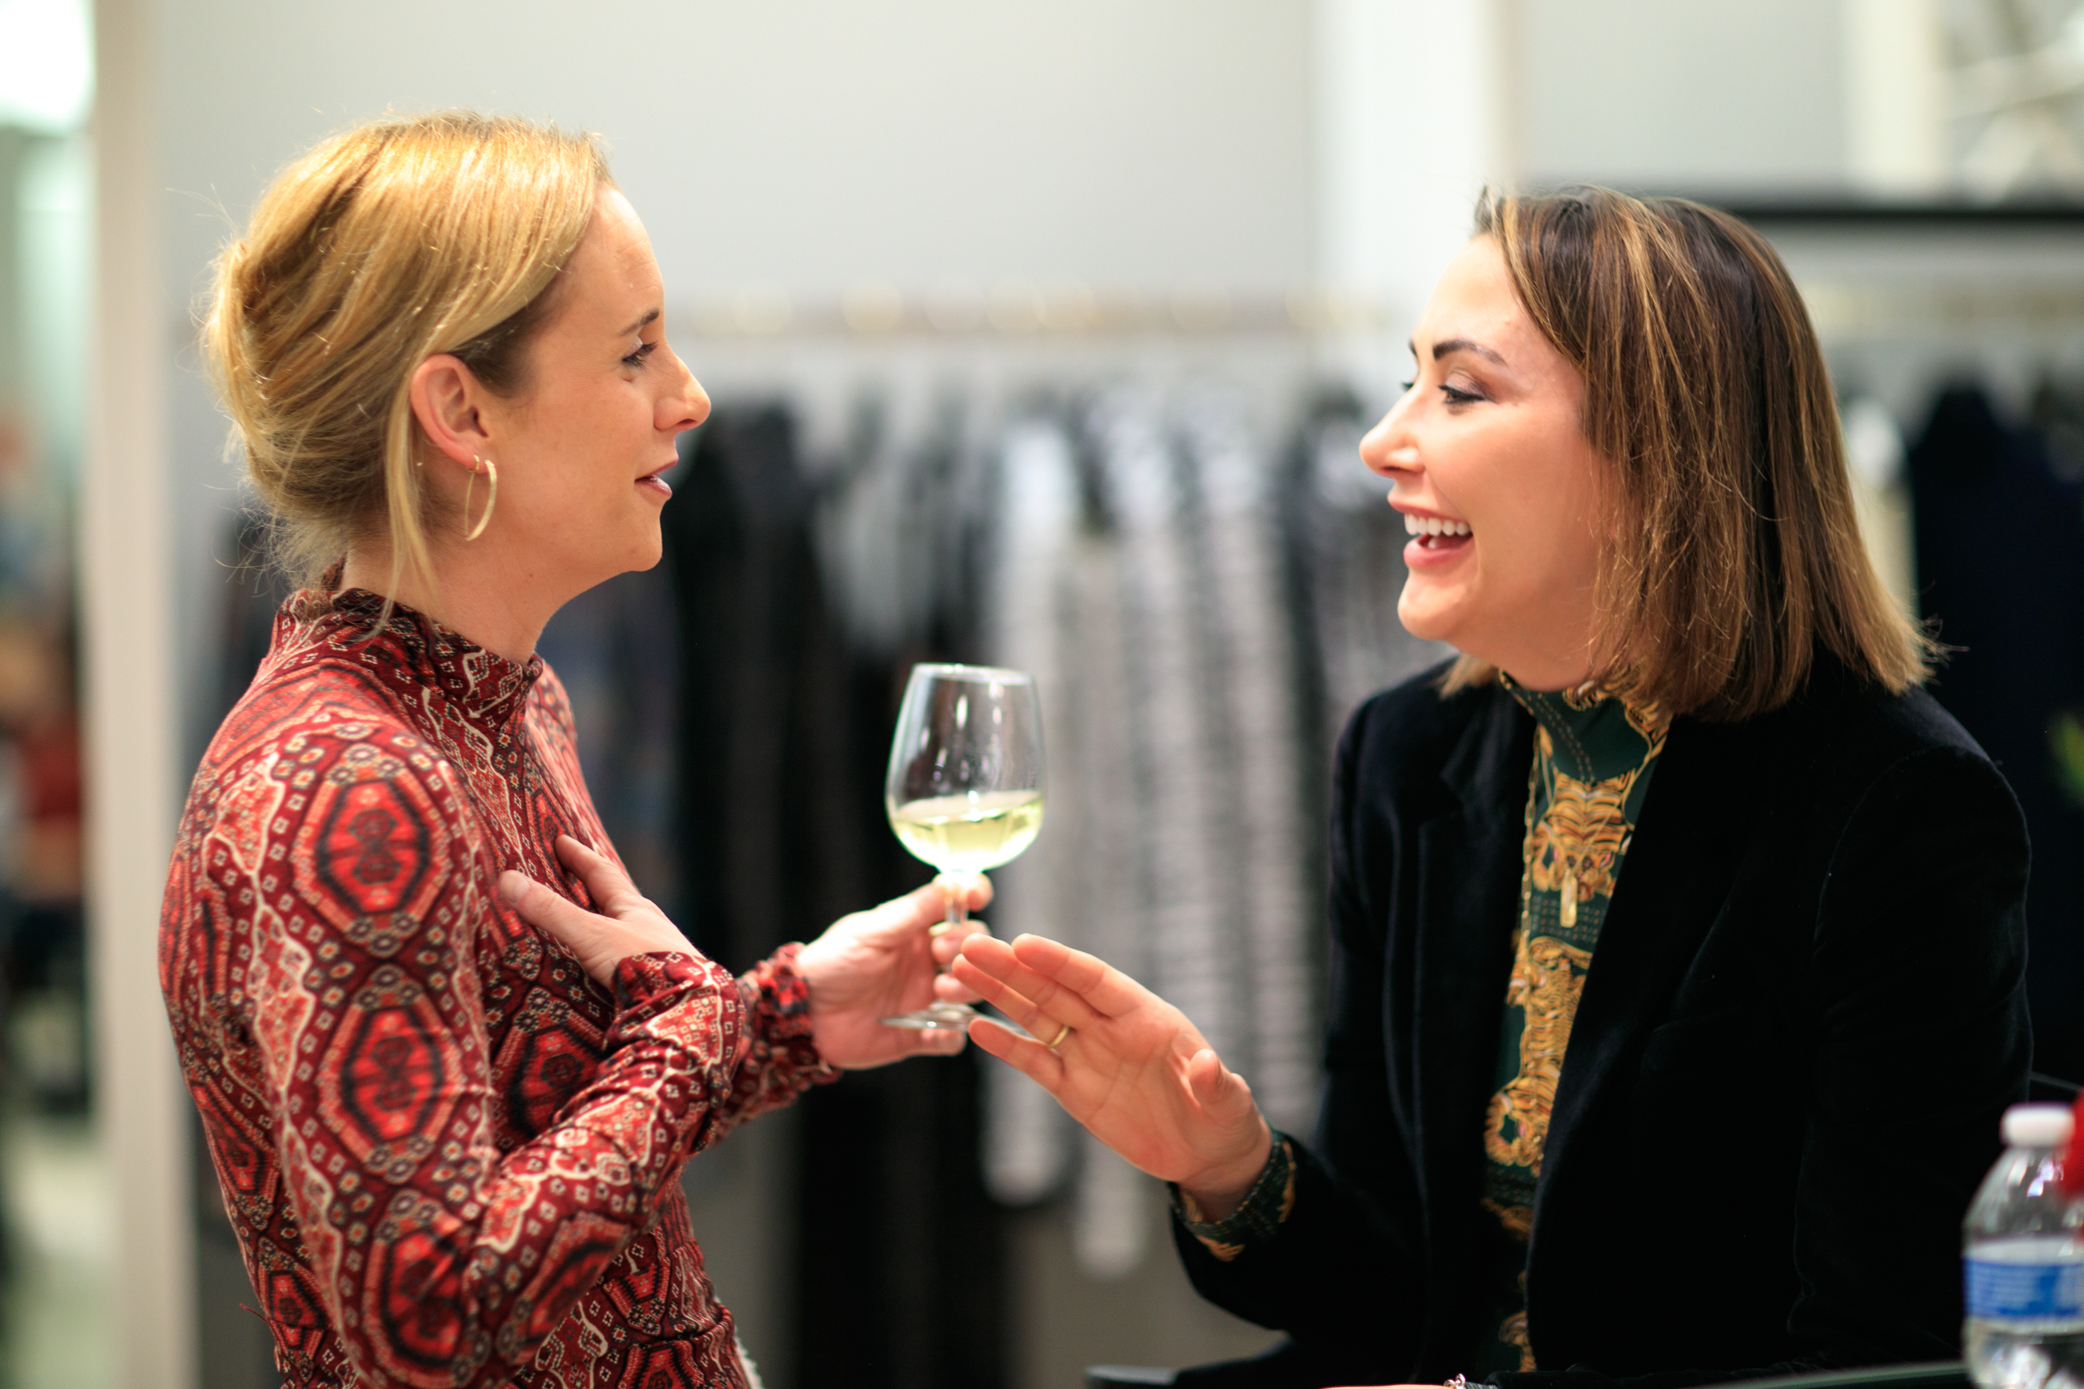 Neiman Marcus Partners with over 100 Influential Women in Nationwide Panel  Series - WomenInc.